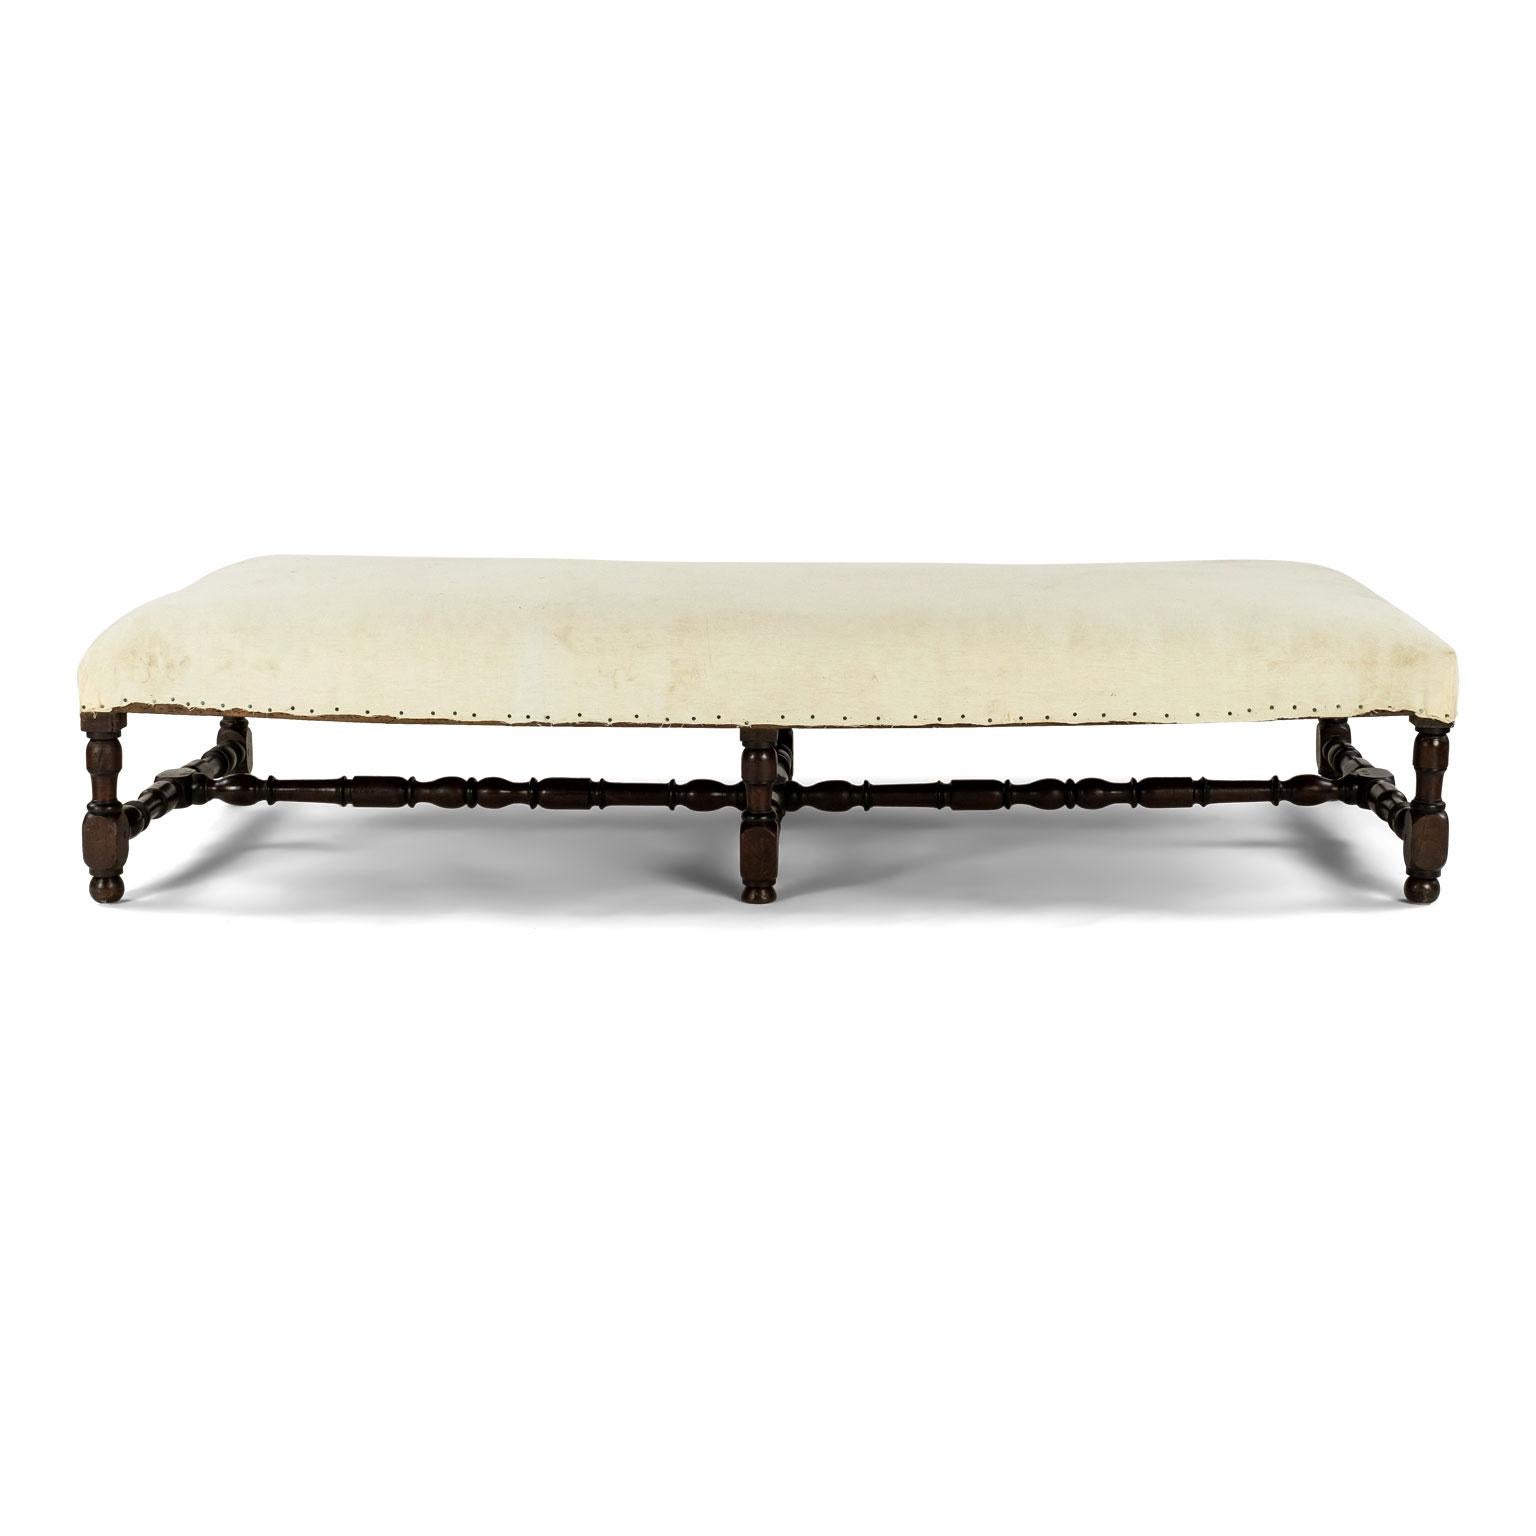 Large Louis XIV upholstered oak bench dating to early 19th century. Can serve as a bench, ottoman or coffee table. Currently covered in off-white muslin and ready to be recovered in your fabric.